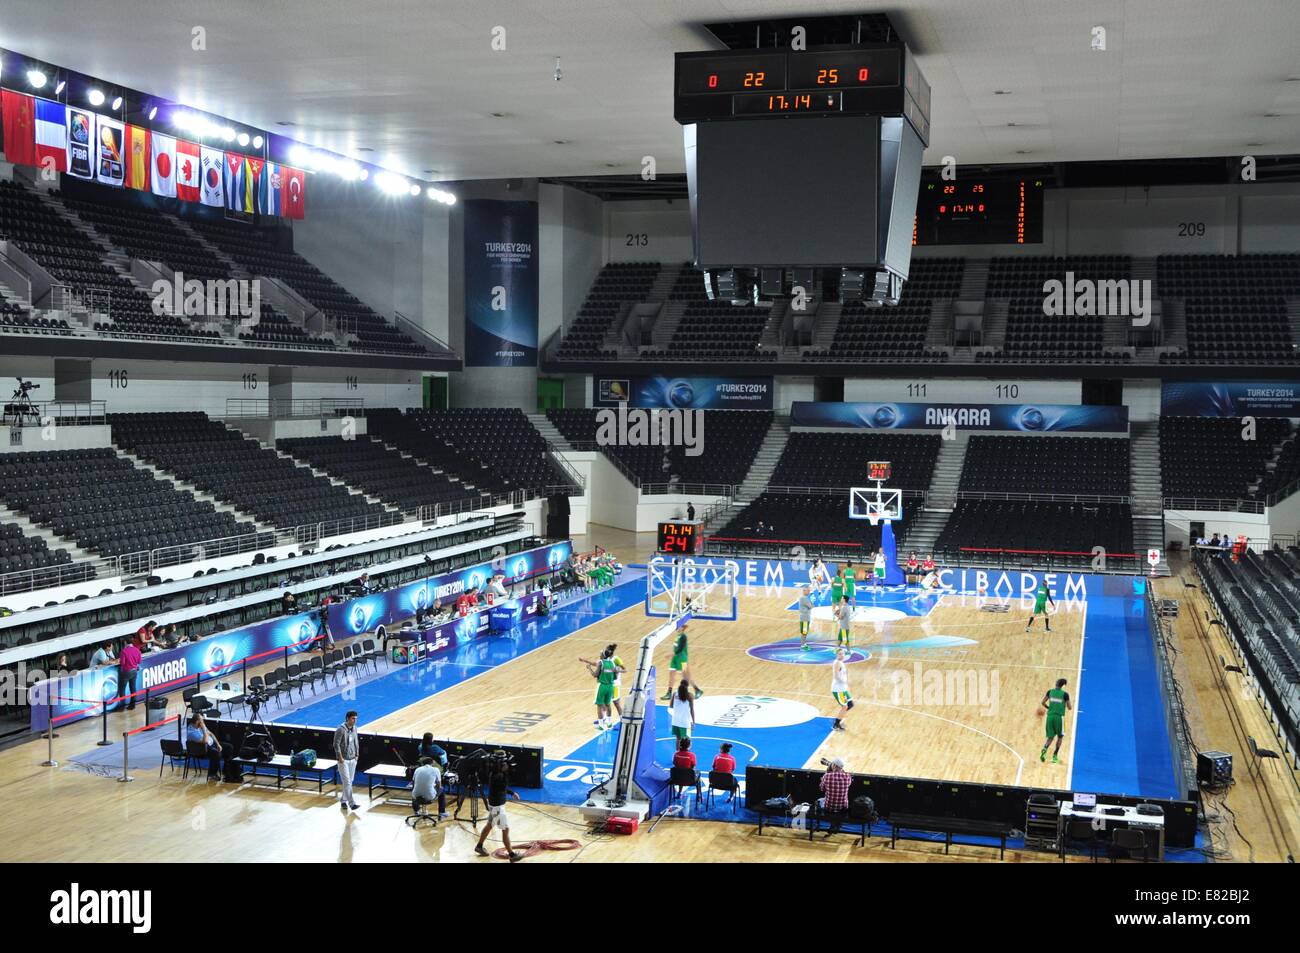 Indoor sporting arena Ankara Arena, in which these days are played 2014 FIBA World Championship for Women matches, is seen in Ankara, Turkey, September 26, 2014. The arena opened in April 2010, its seating capacity is 10,400 spectators and it was built for the 2010 FIBA World Championships. (CTK Photo/David Svab) Stock Photo